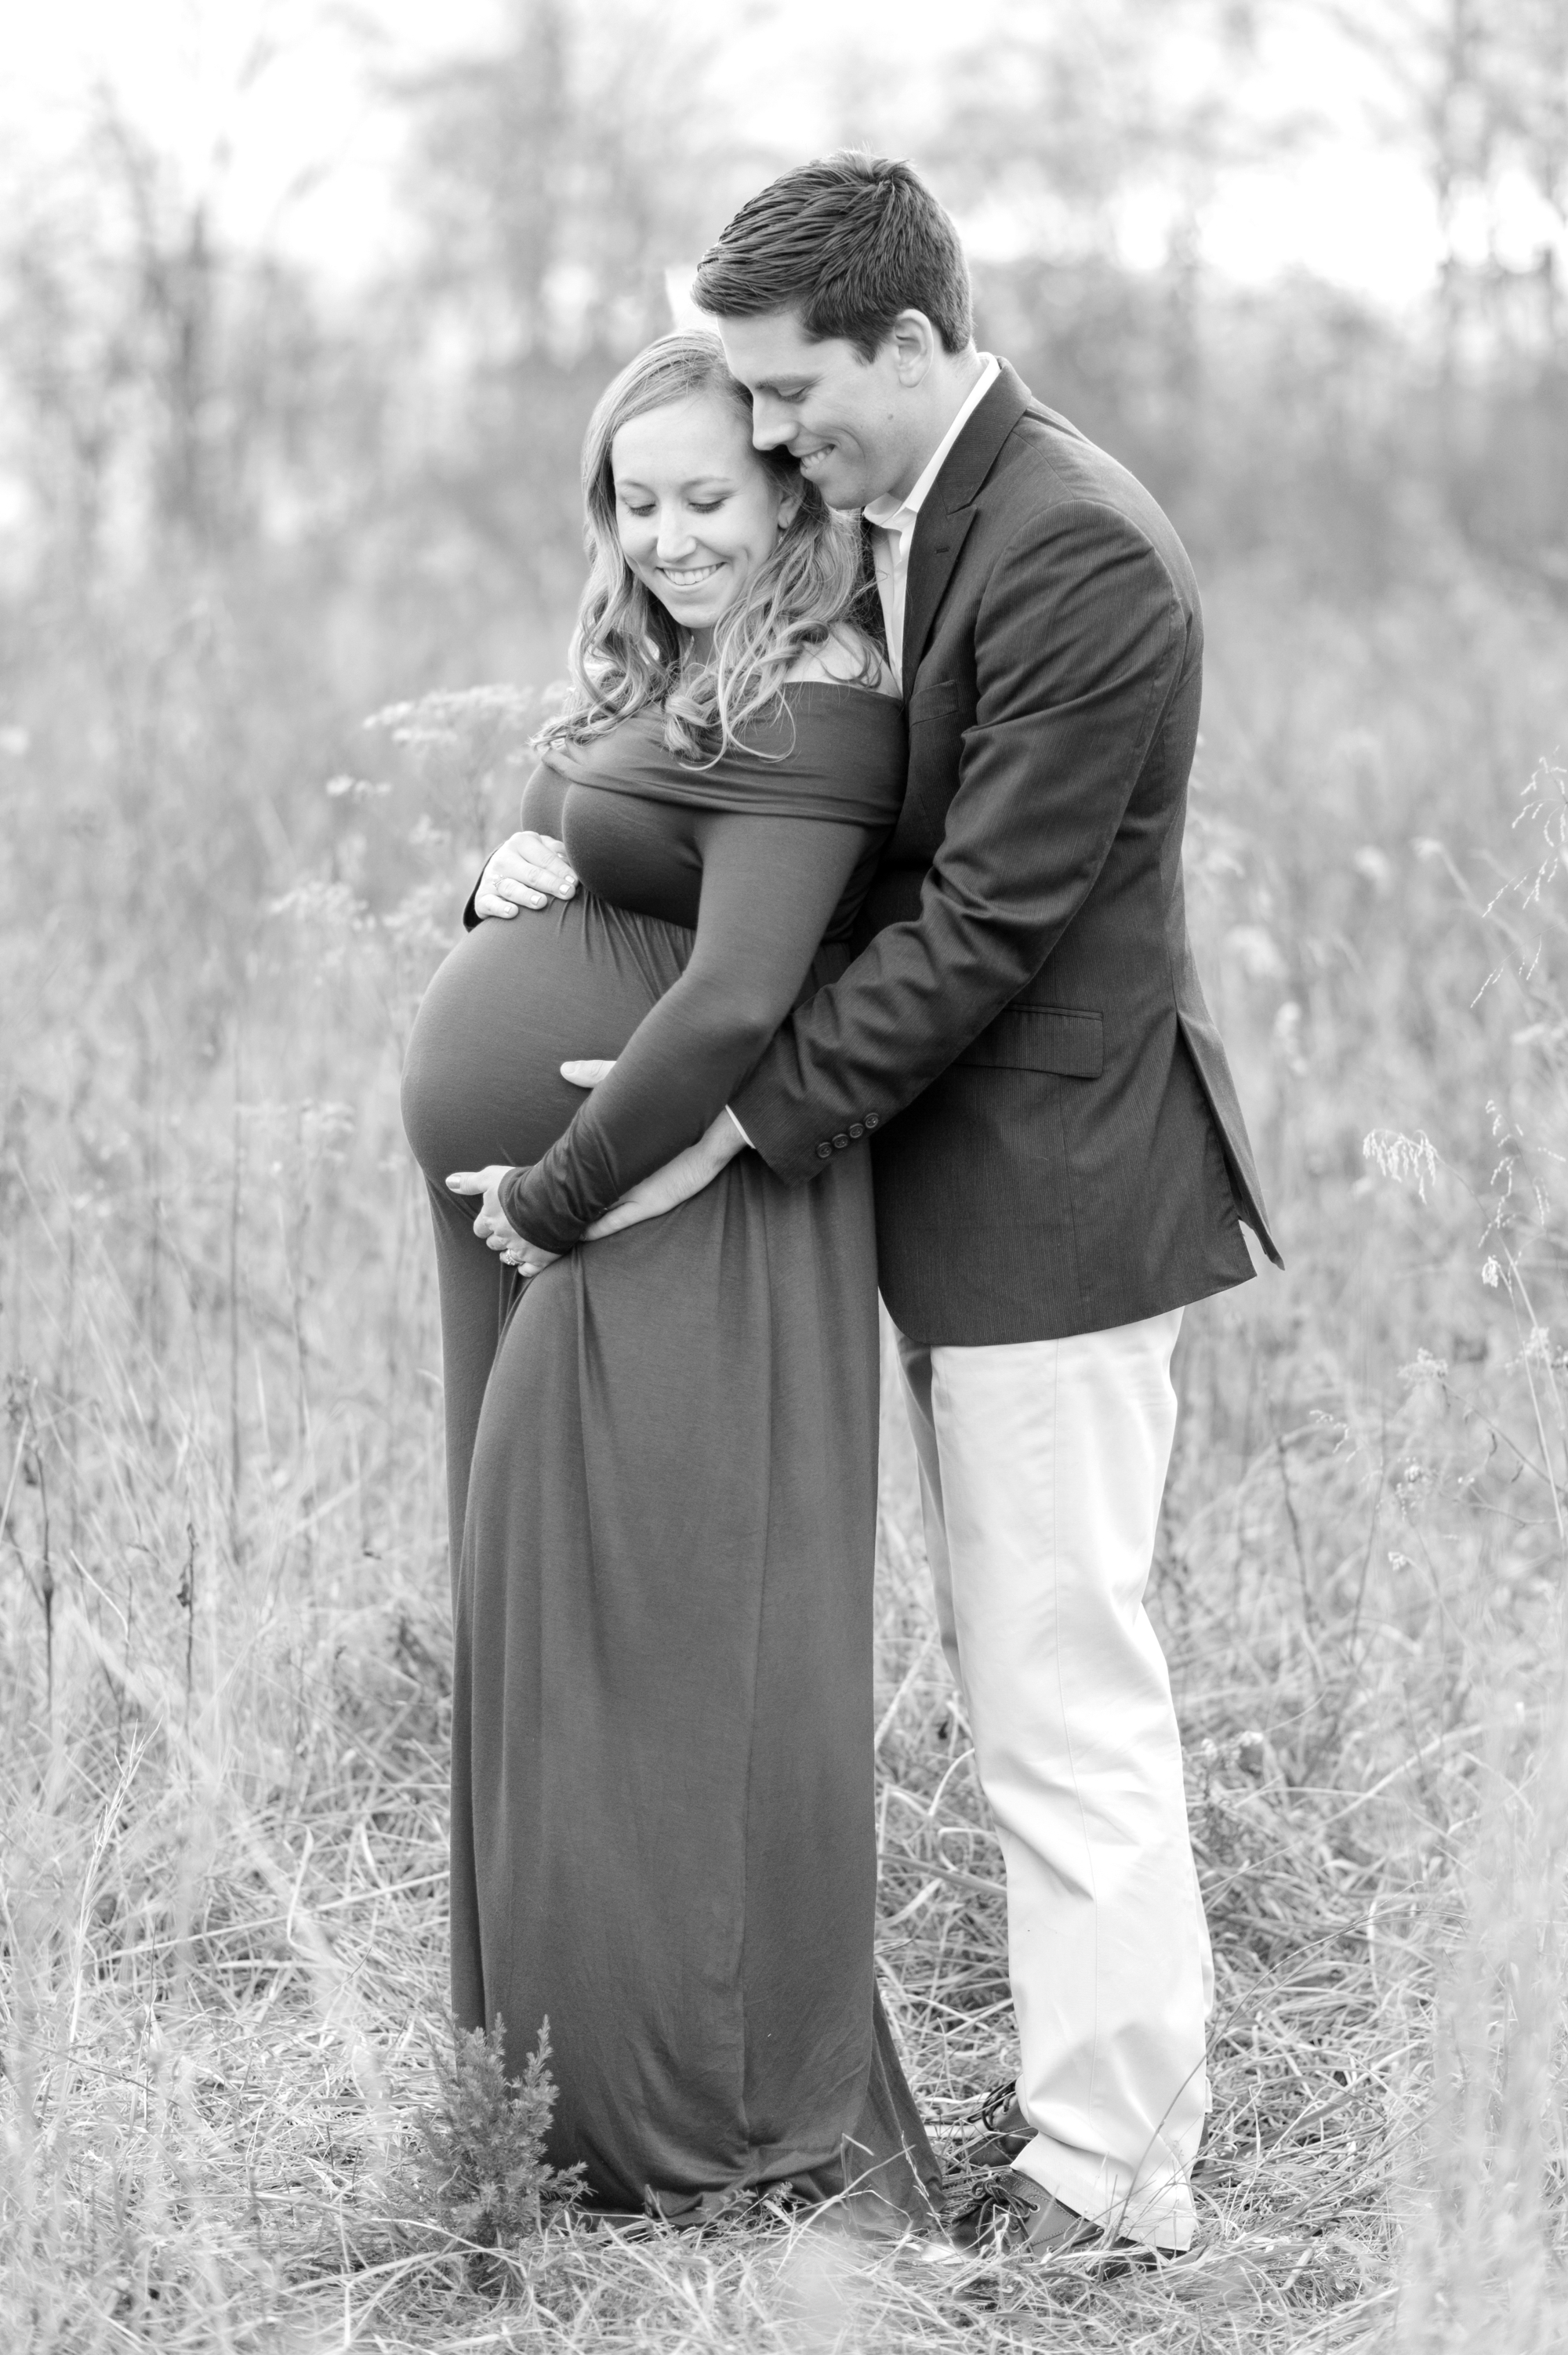 AG and Kevin Maternity-271_anna grace photography baltimore maryland maternity photographer cromwell valley park photo.jpg